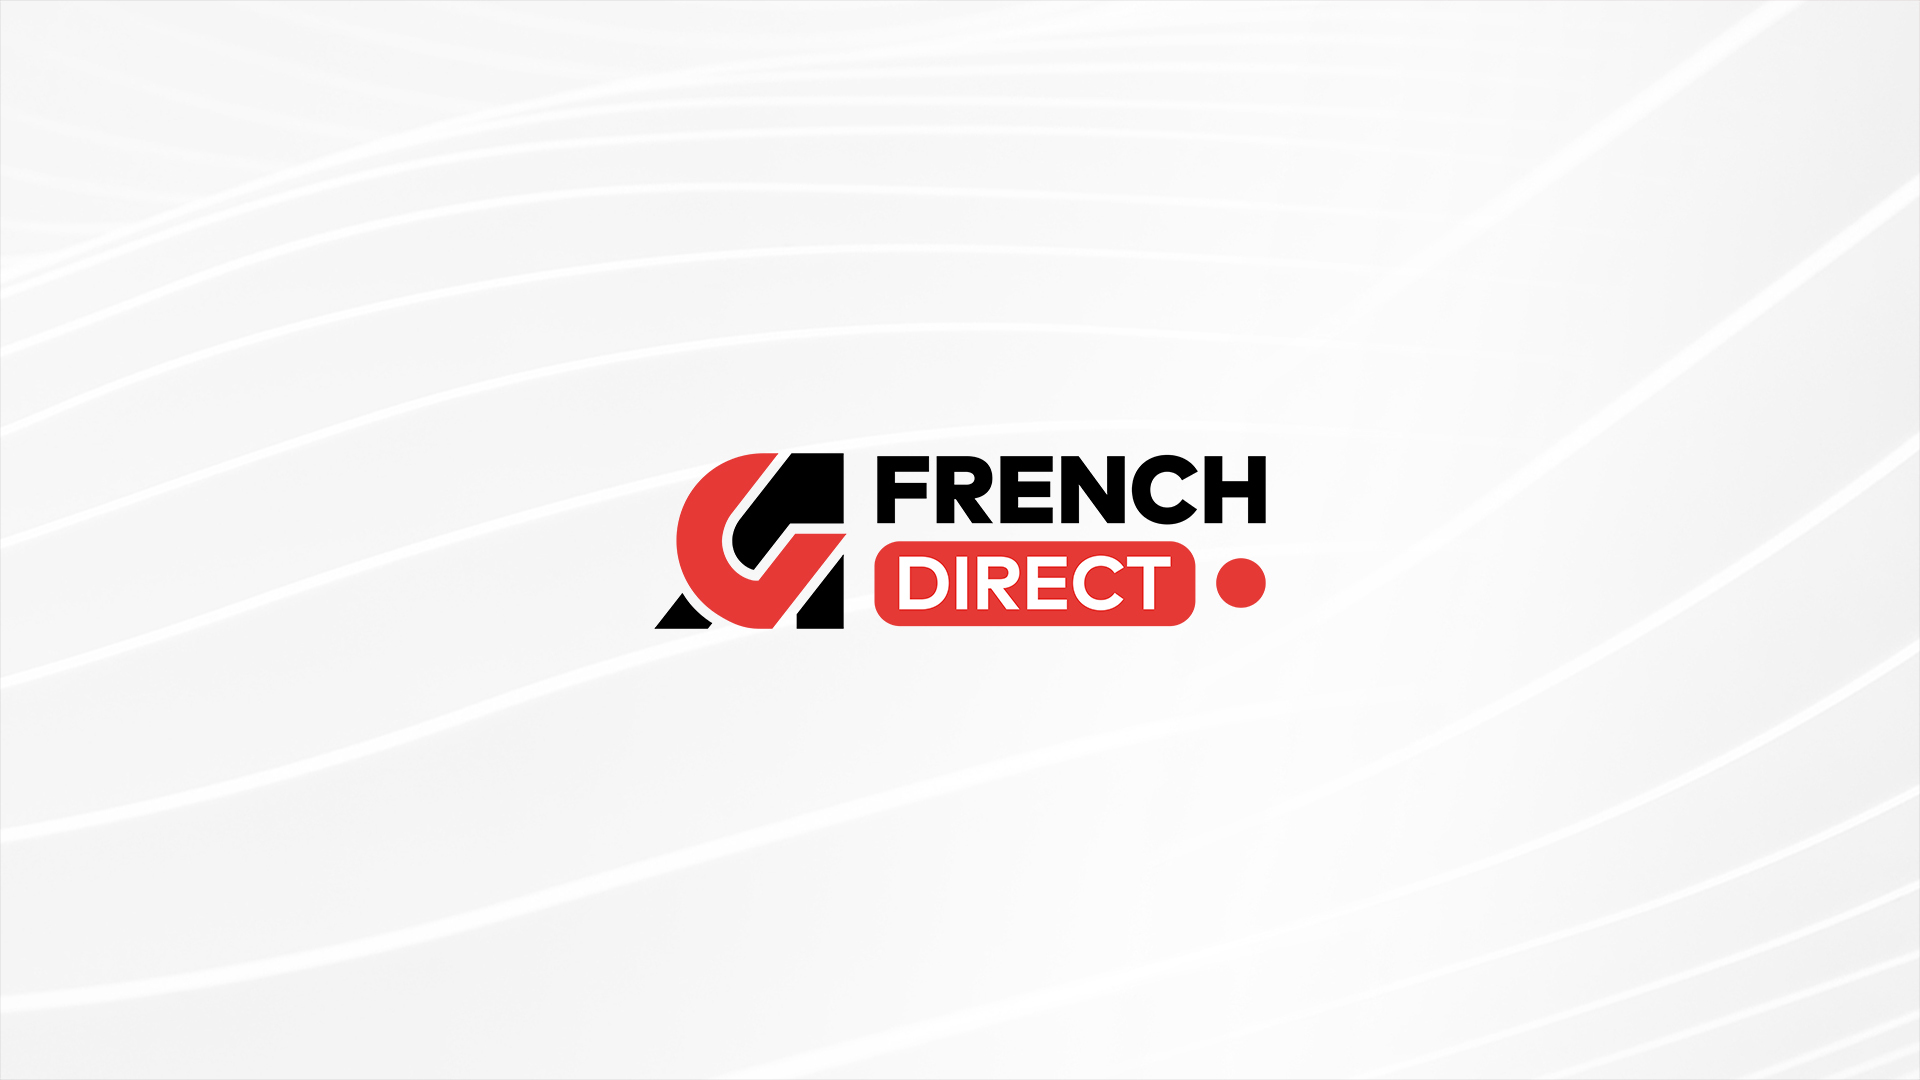 AG French Direct: Here are 12 intro games coming to Xbox!  |  Xbox One